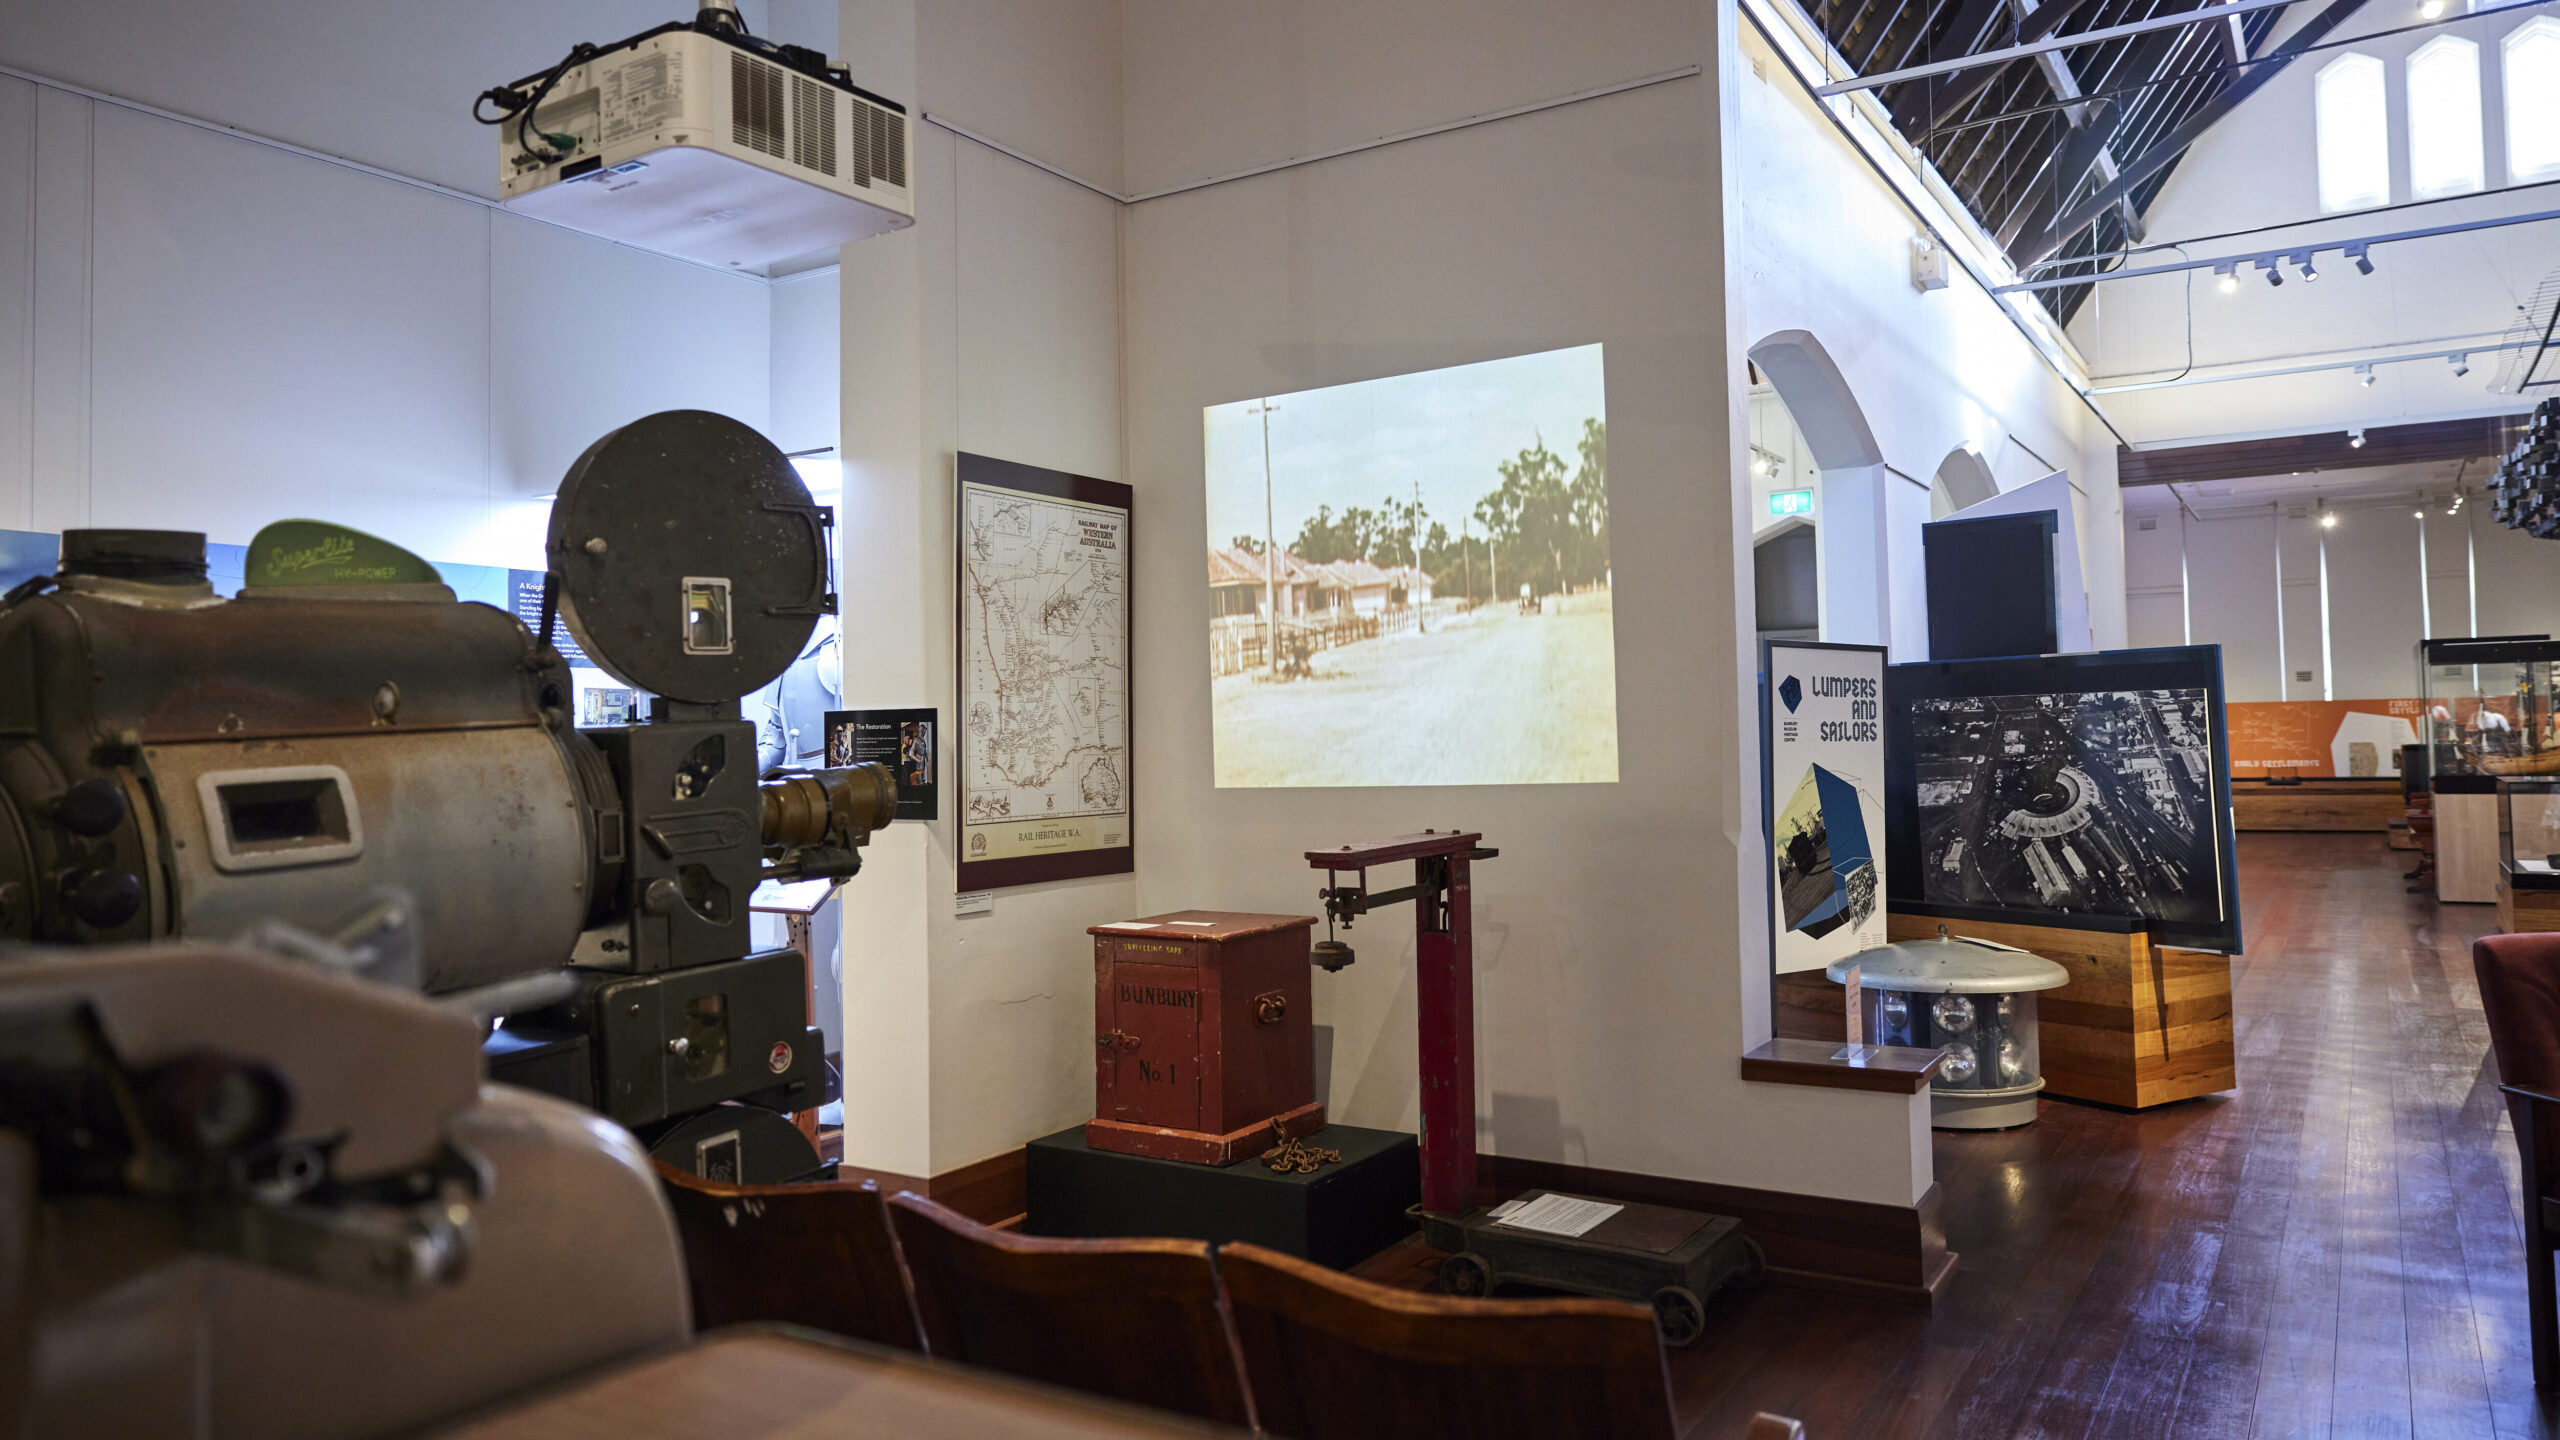 Inside of the museum featuring an old film projector projecting old footage of a homestead on to a wall. Display cabinets with artefacts and museum signgage.